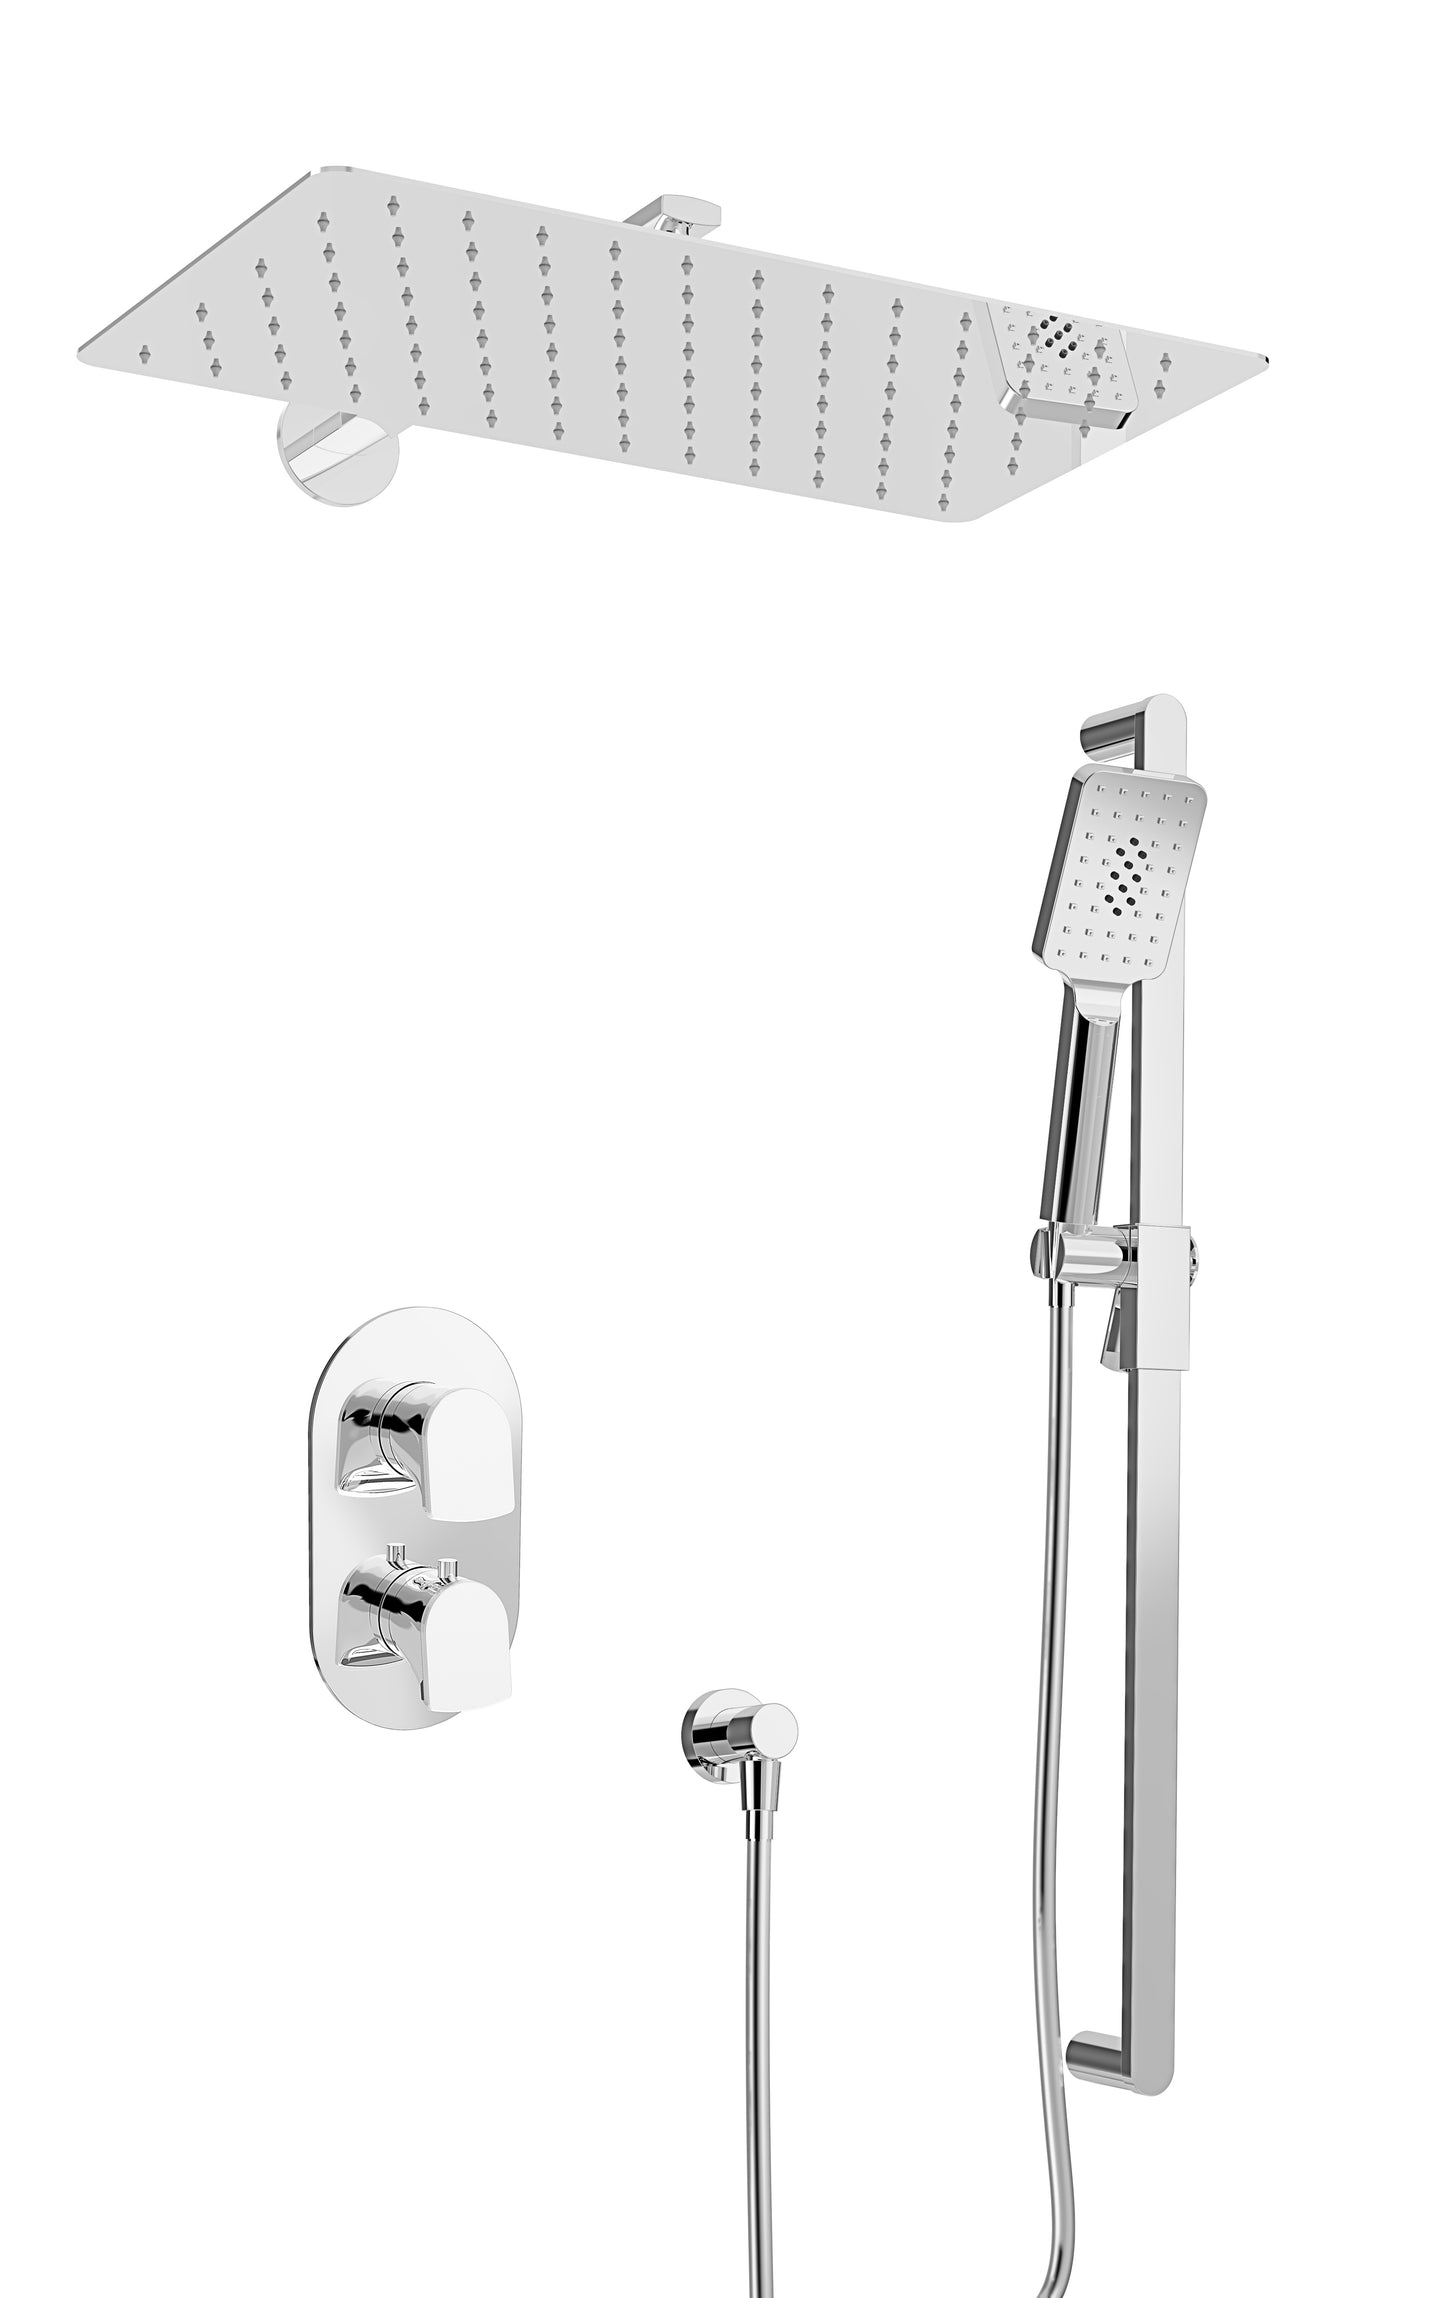 Baril Complete Thermostatic Pressure Balanced Shower Kit (ACCENT B56 4236)